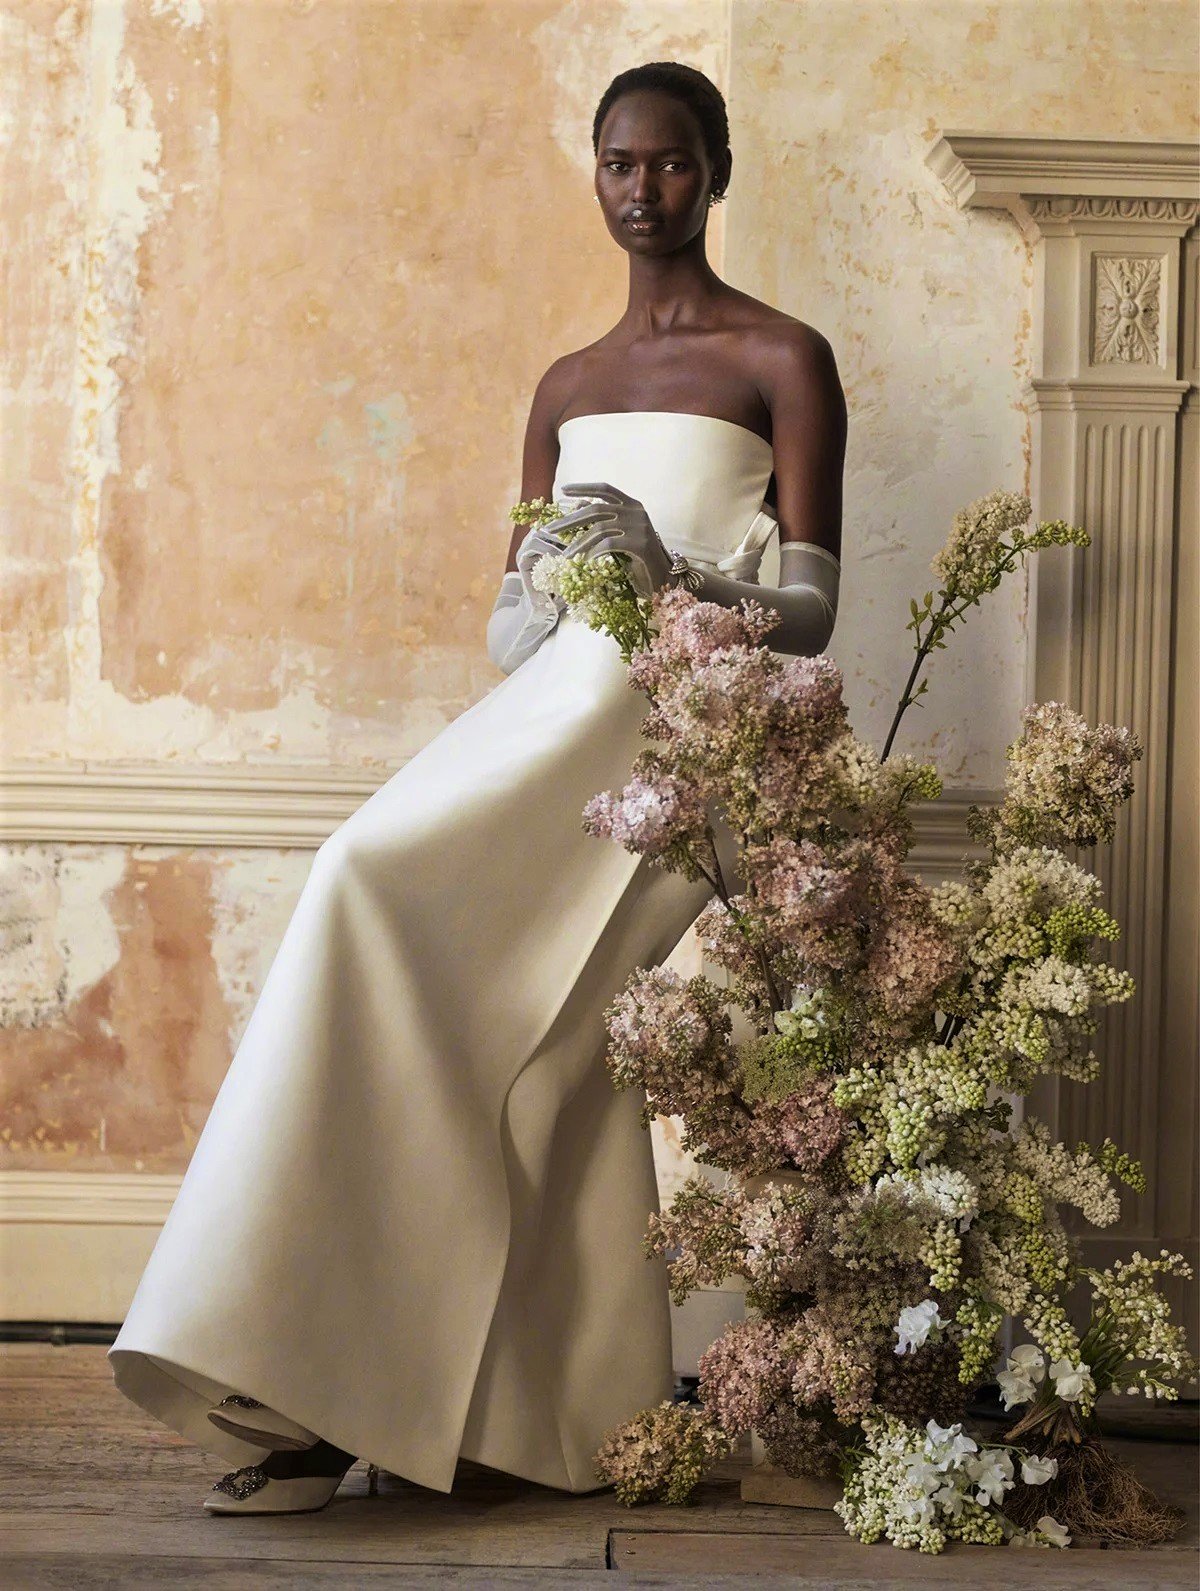 Nyarach-Abouch-Ayuel-covers-British-Vogue-Weddings-May-2022-by-Emma-Tempest-7.jpg